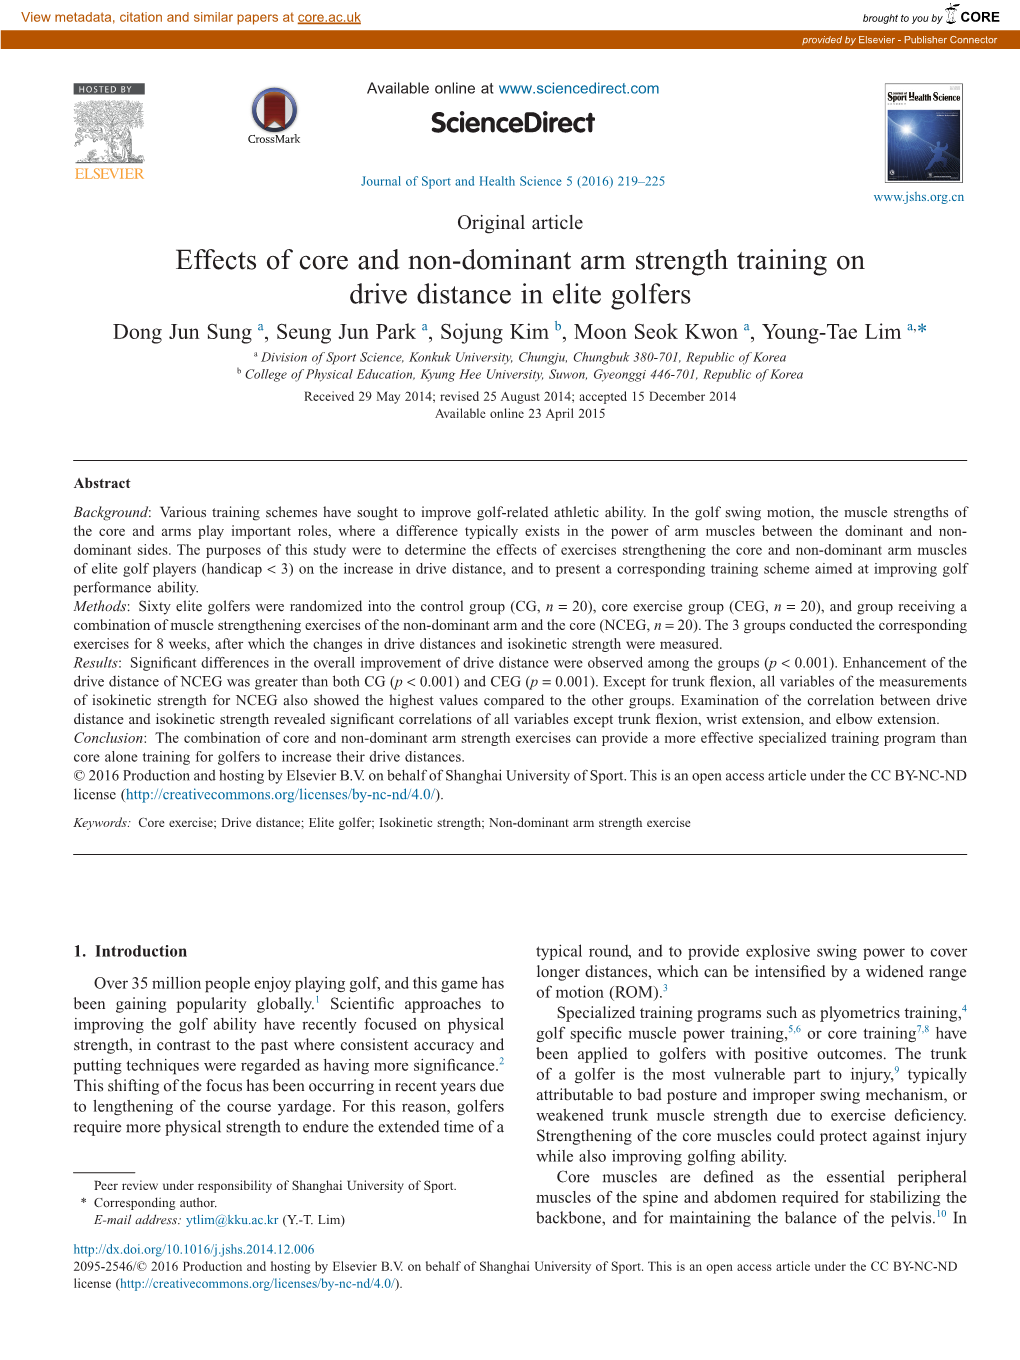 Effects of Core and Non-Dominant Arm Strength Training on Drive Distance